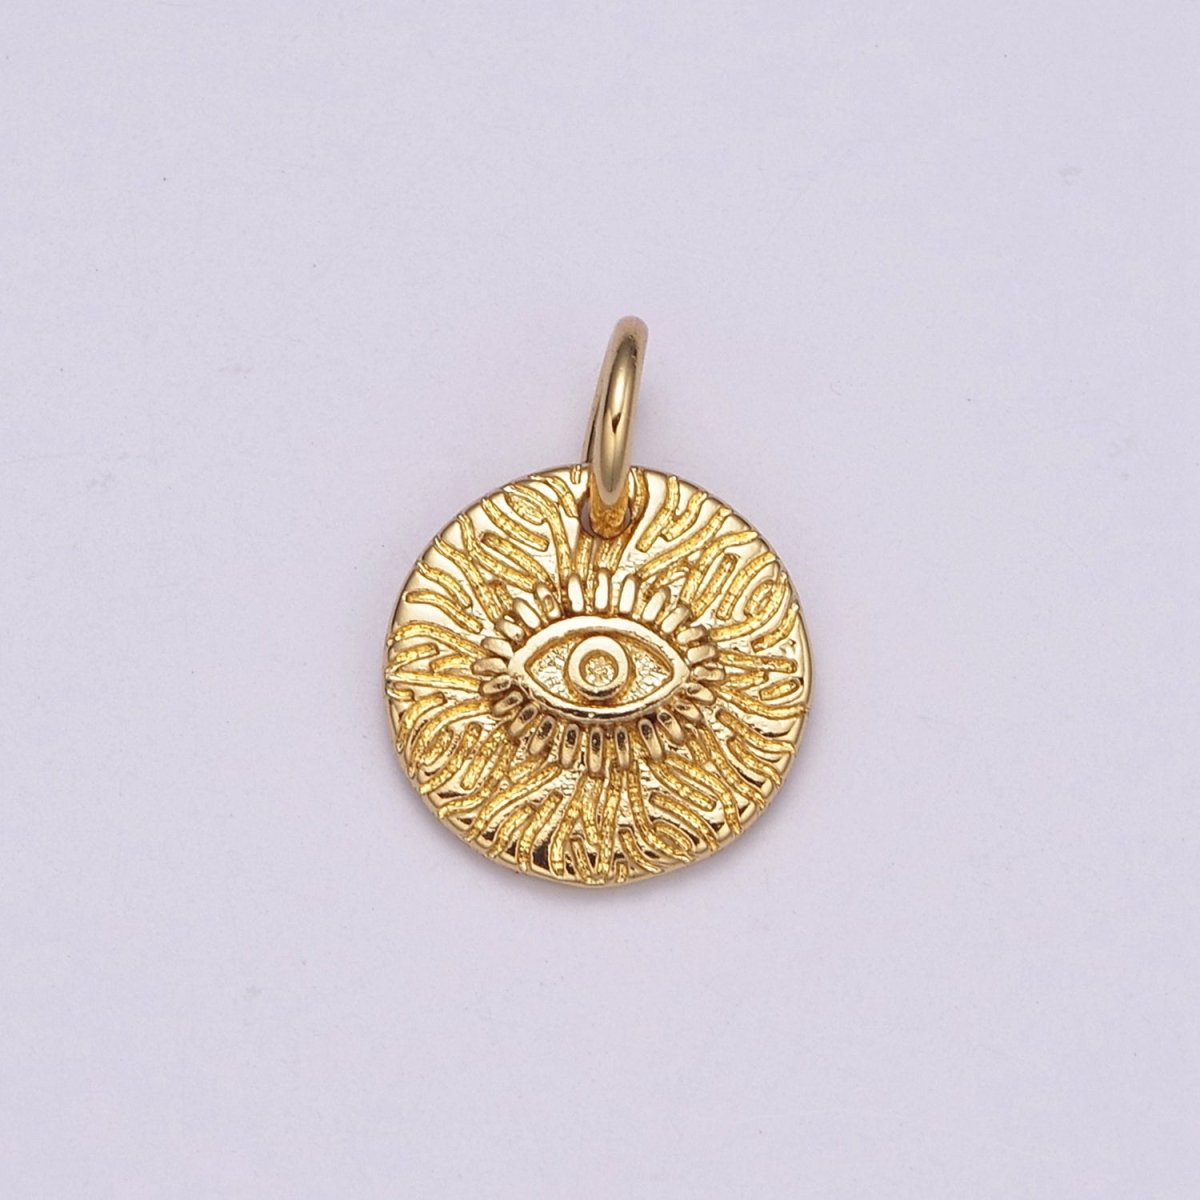 Dainty Evil Eye Charm Designs Protection Coin Greek Charm Jewelry Gold Pendant Necklace Earrings Medallion N-232 - DLUXCA